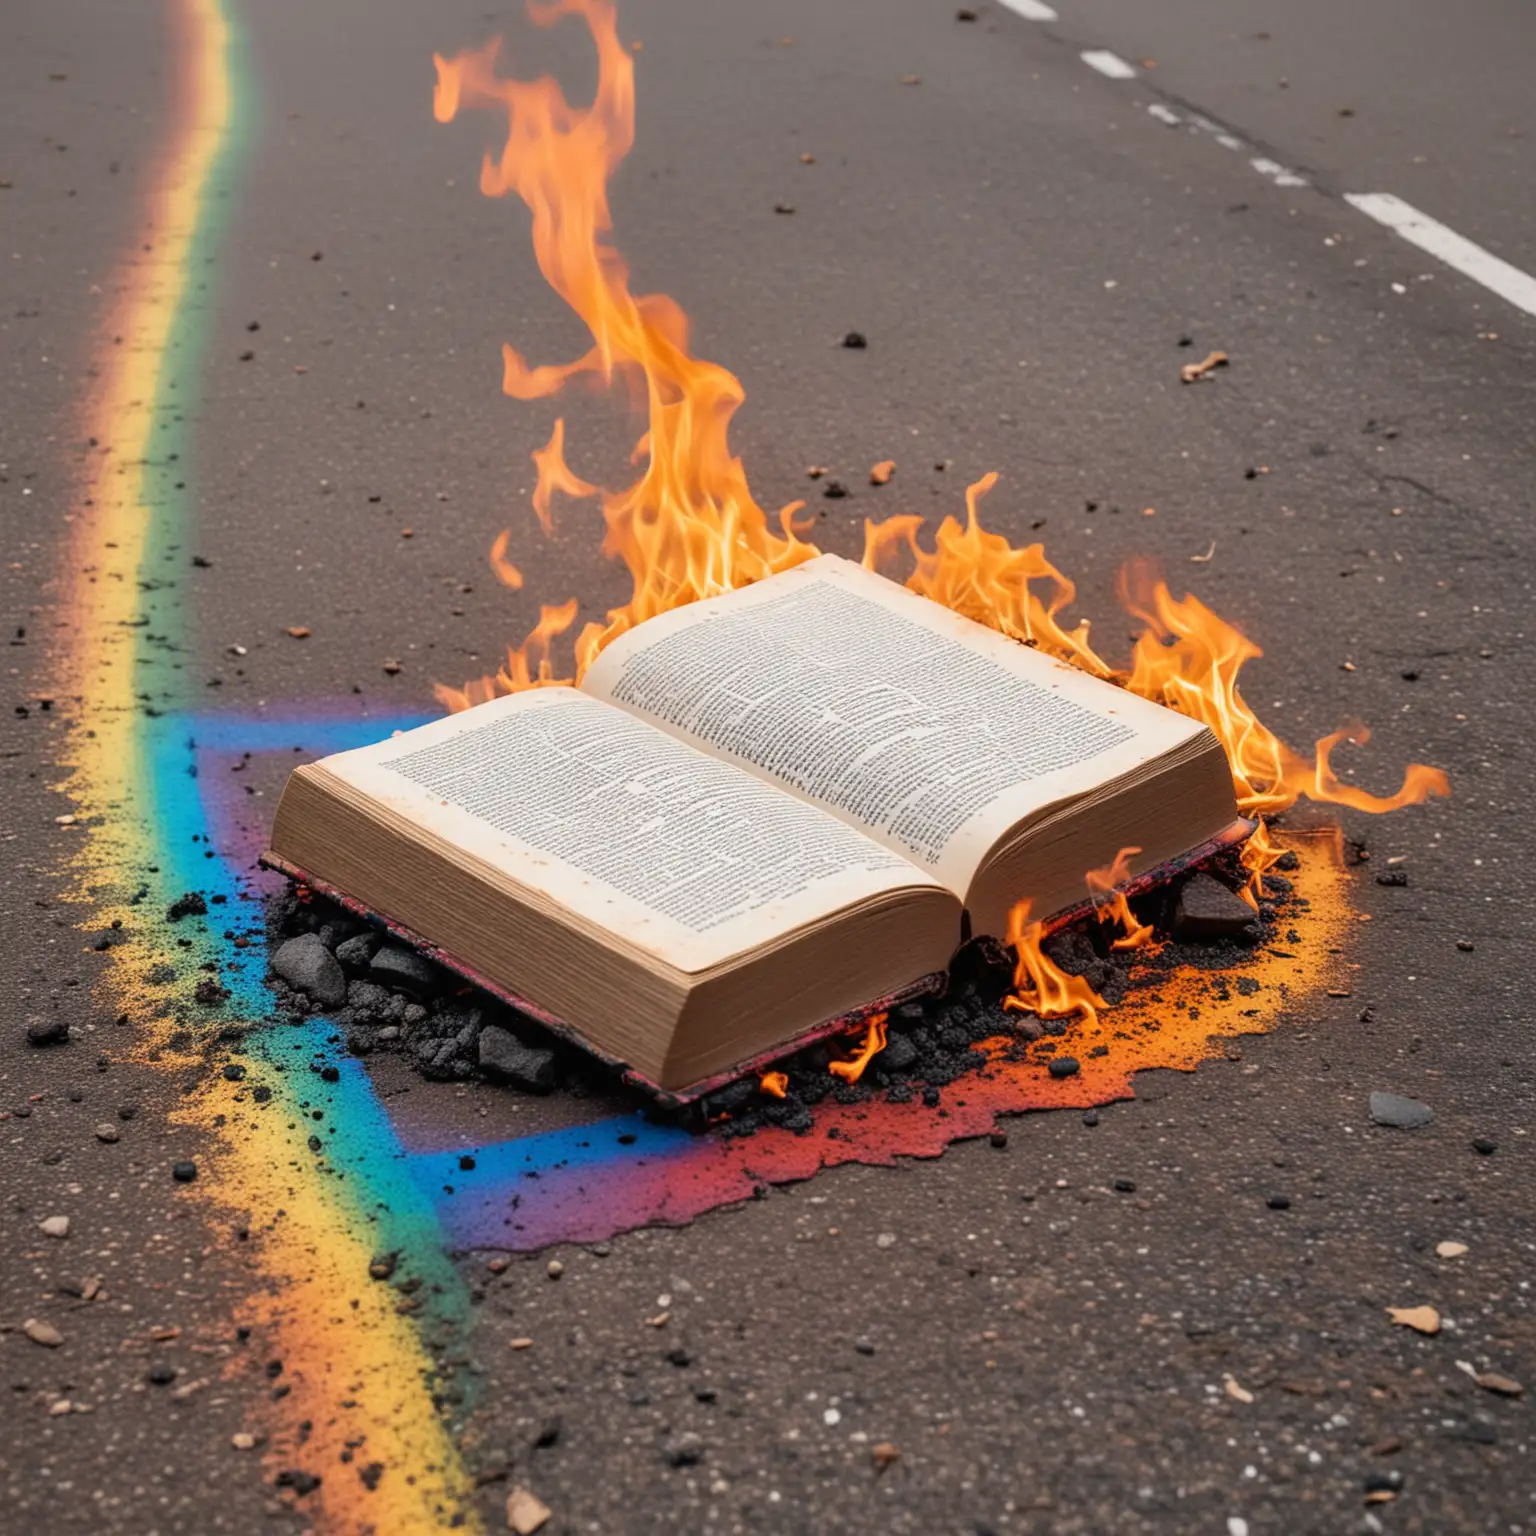 A burning book laying on a rainbow road